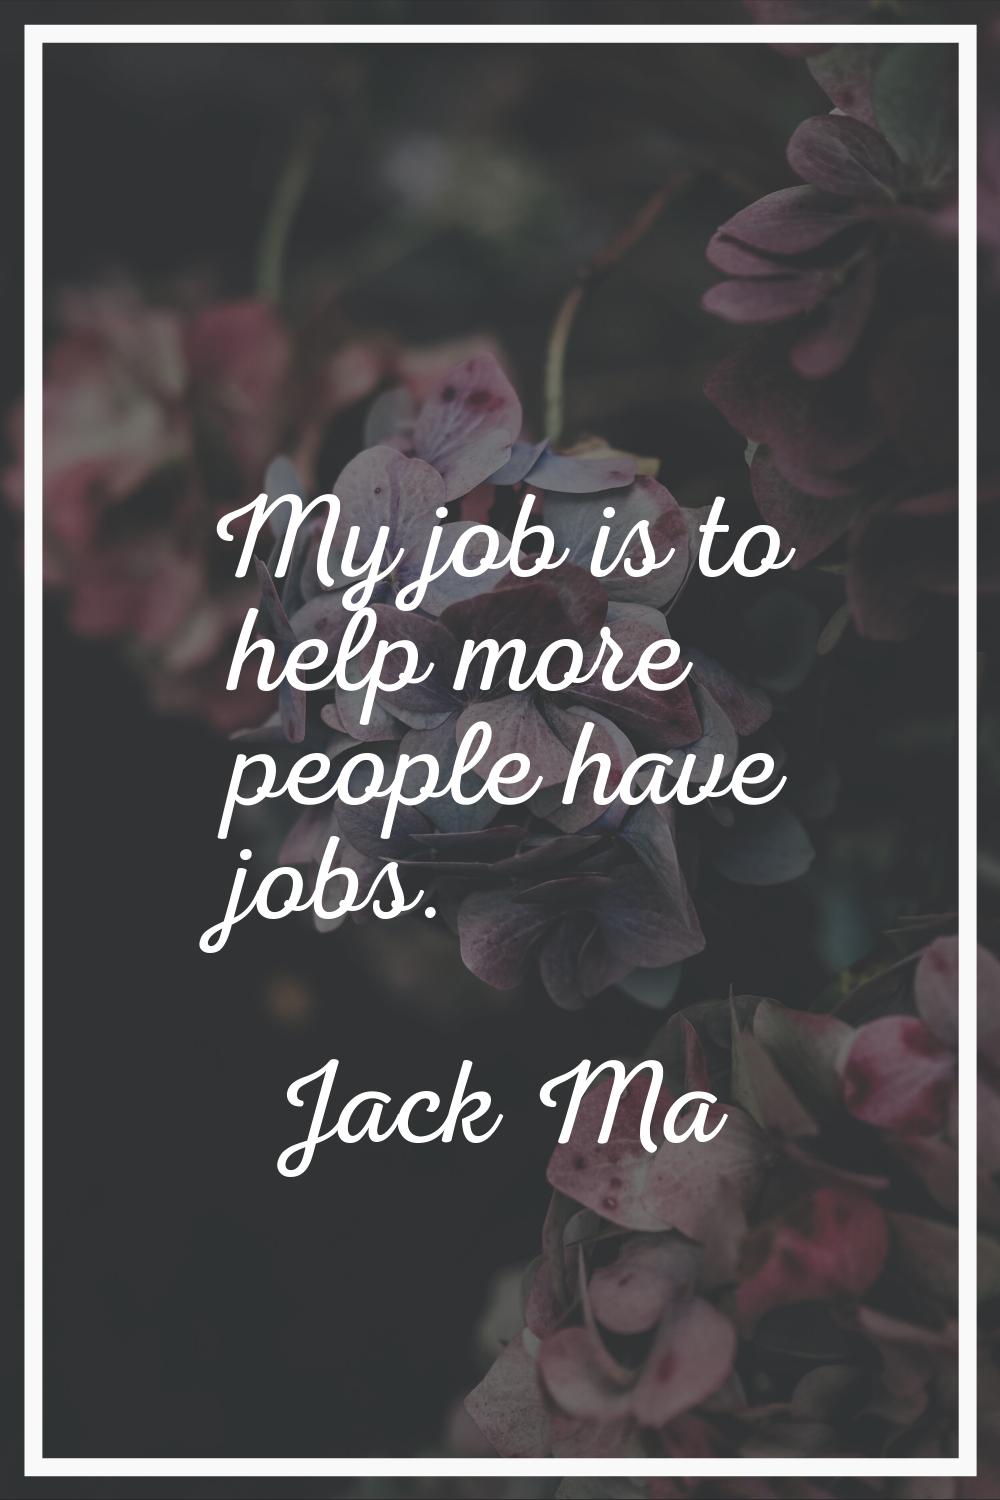 My job is to help more people have jobs.